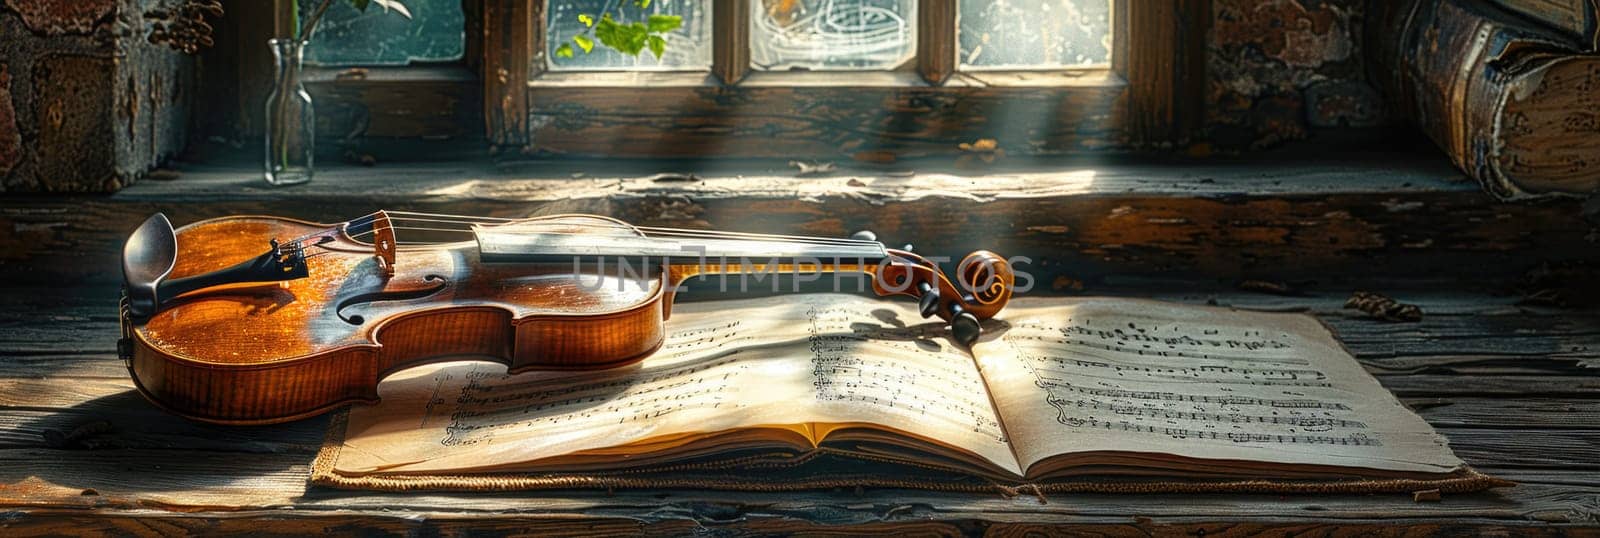 Violin Resting on Open Book by but_photo